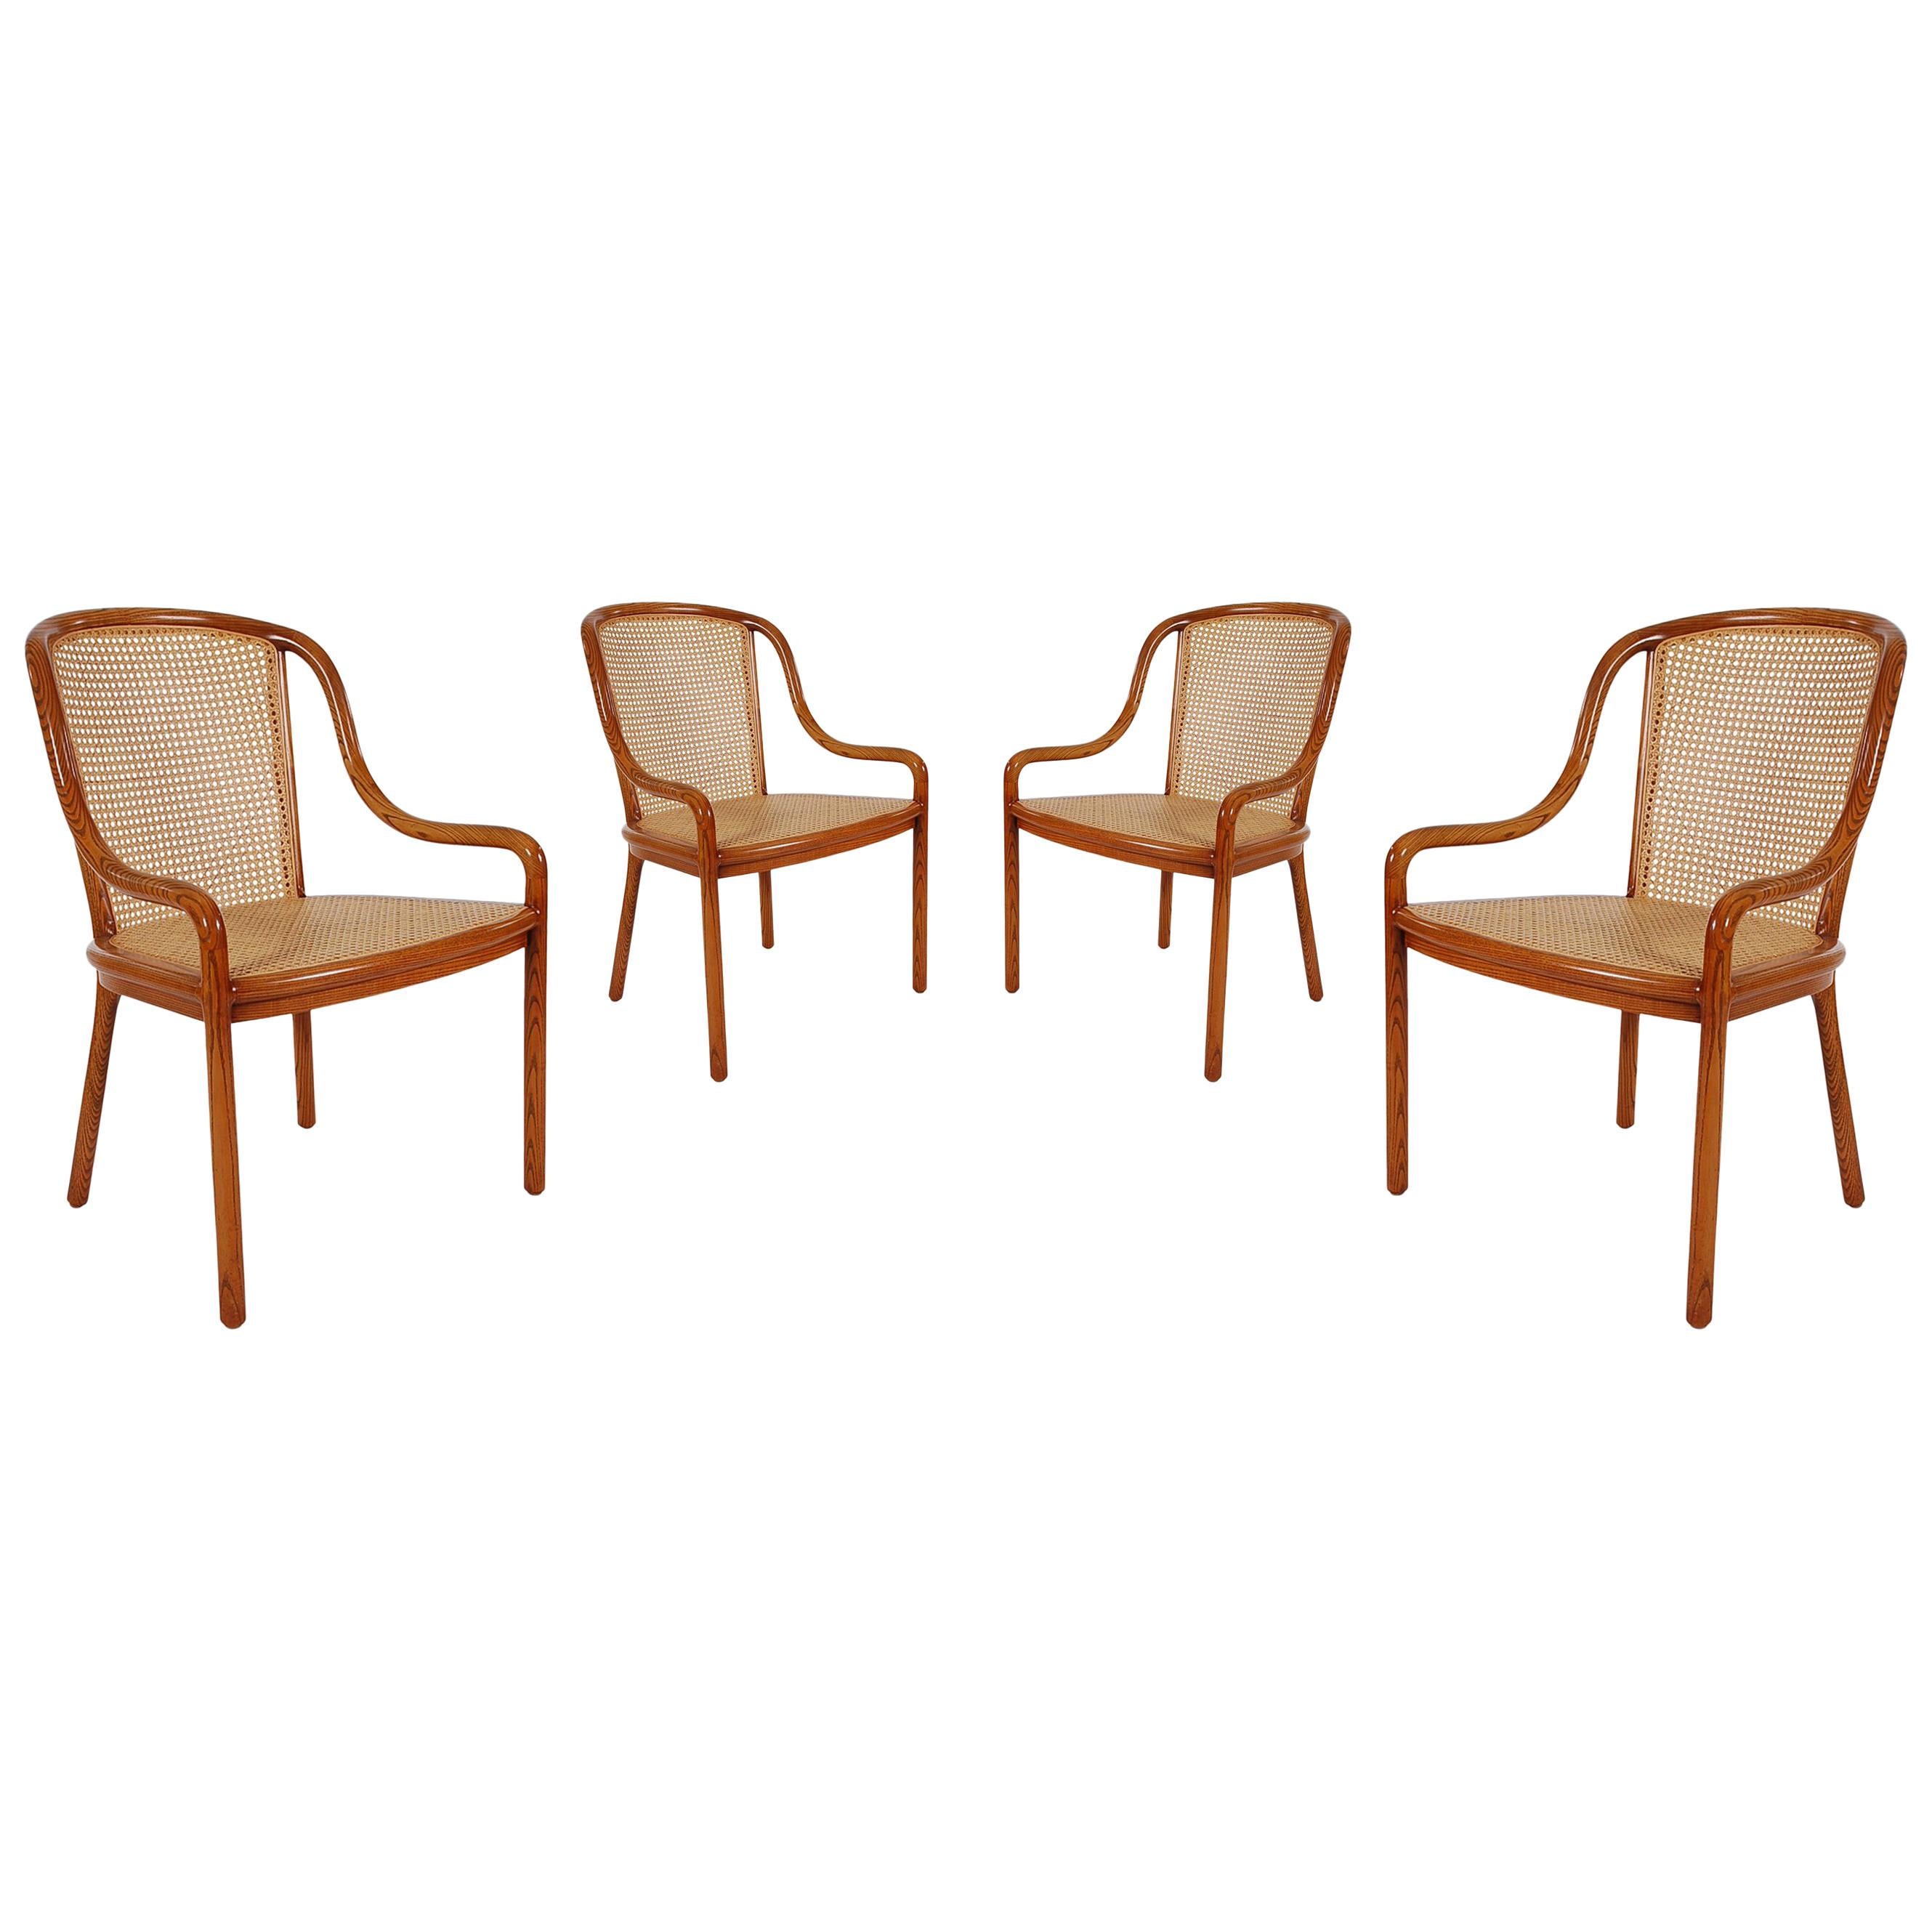 Set of Four Mid-Century Modern Armchair Dining Chairs, Ward Bennet Cane and Oak